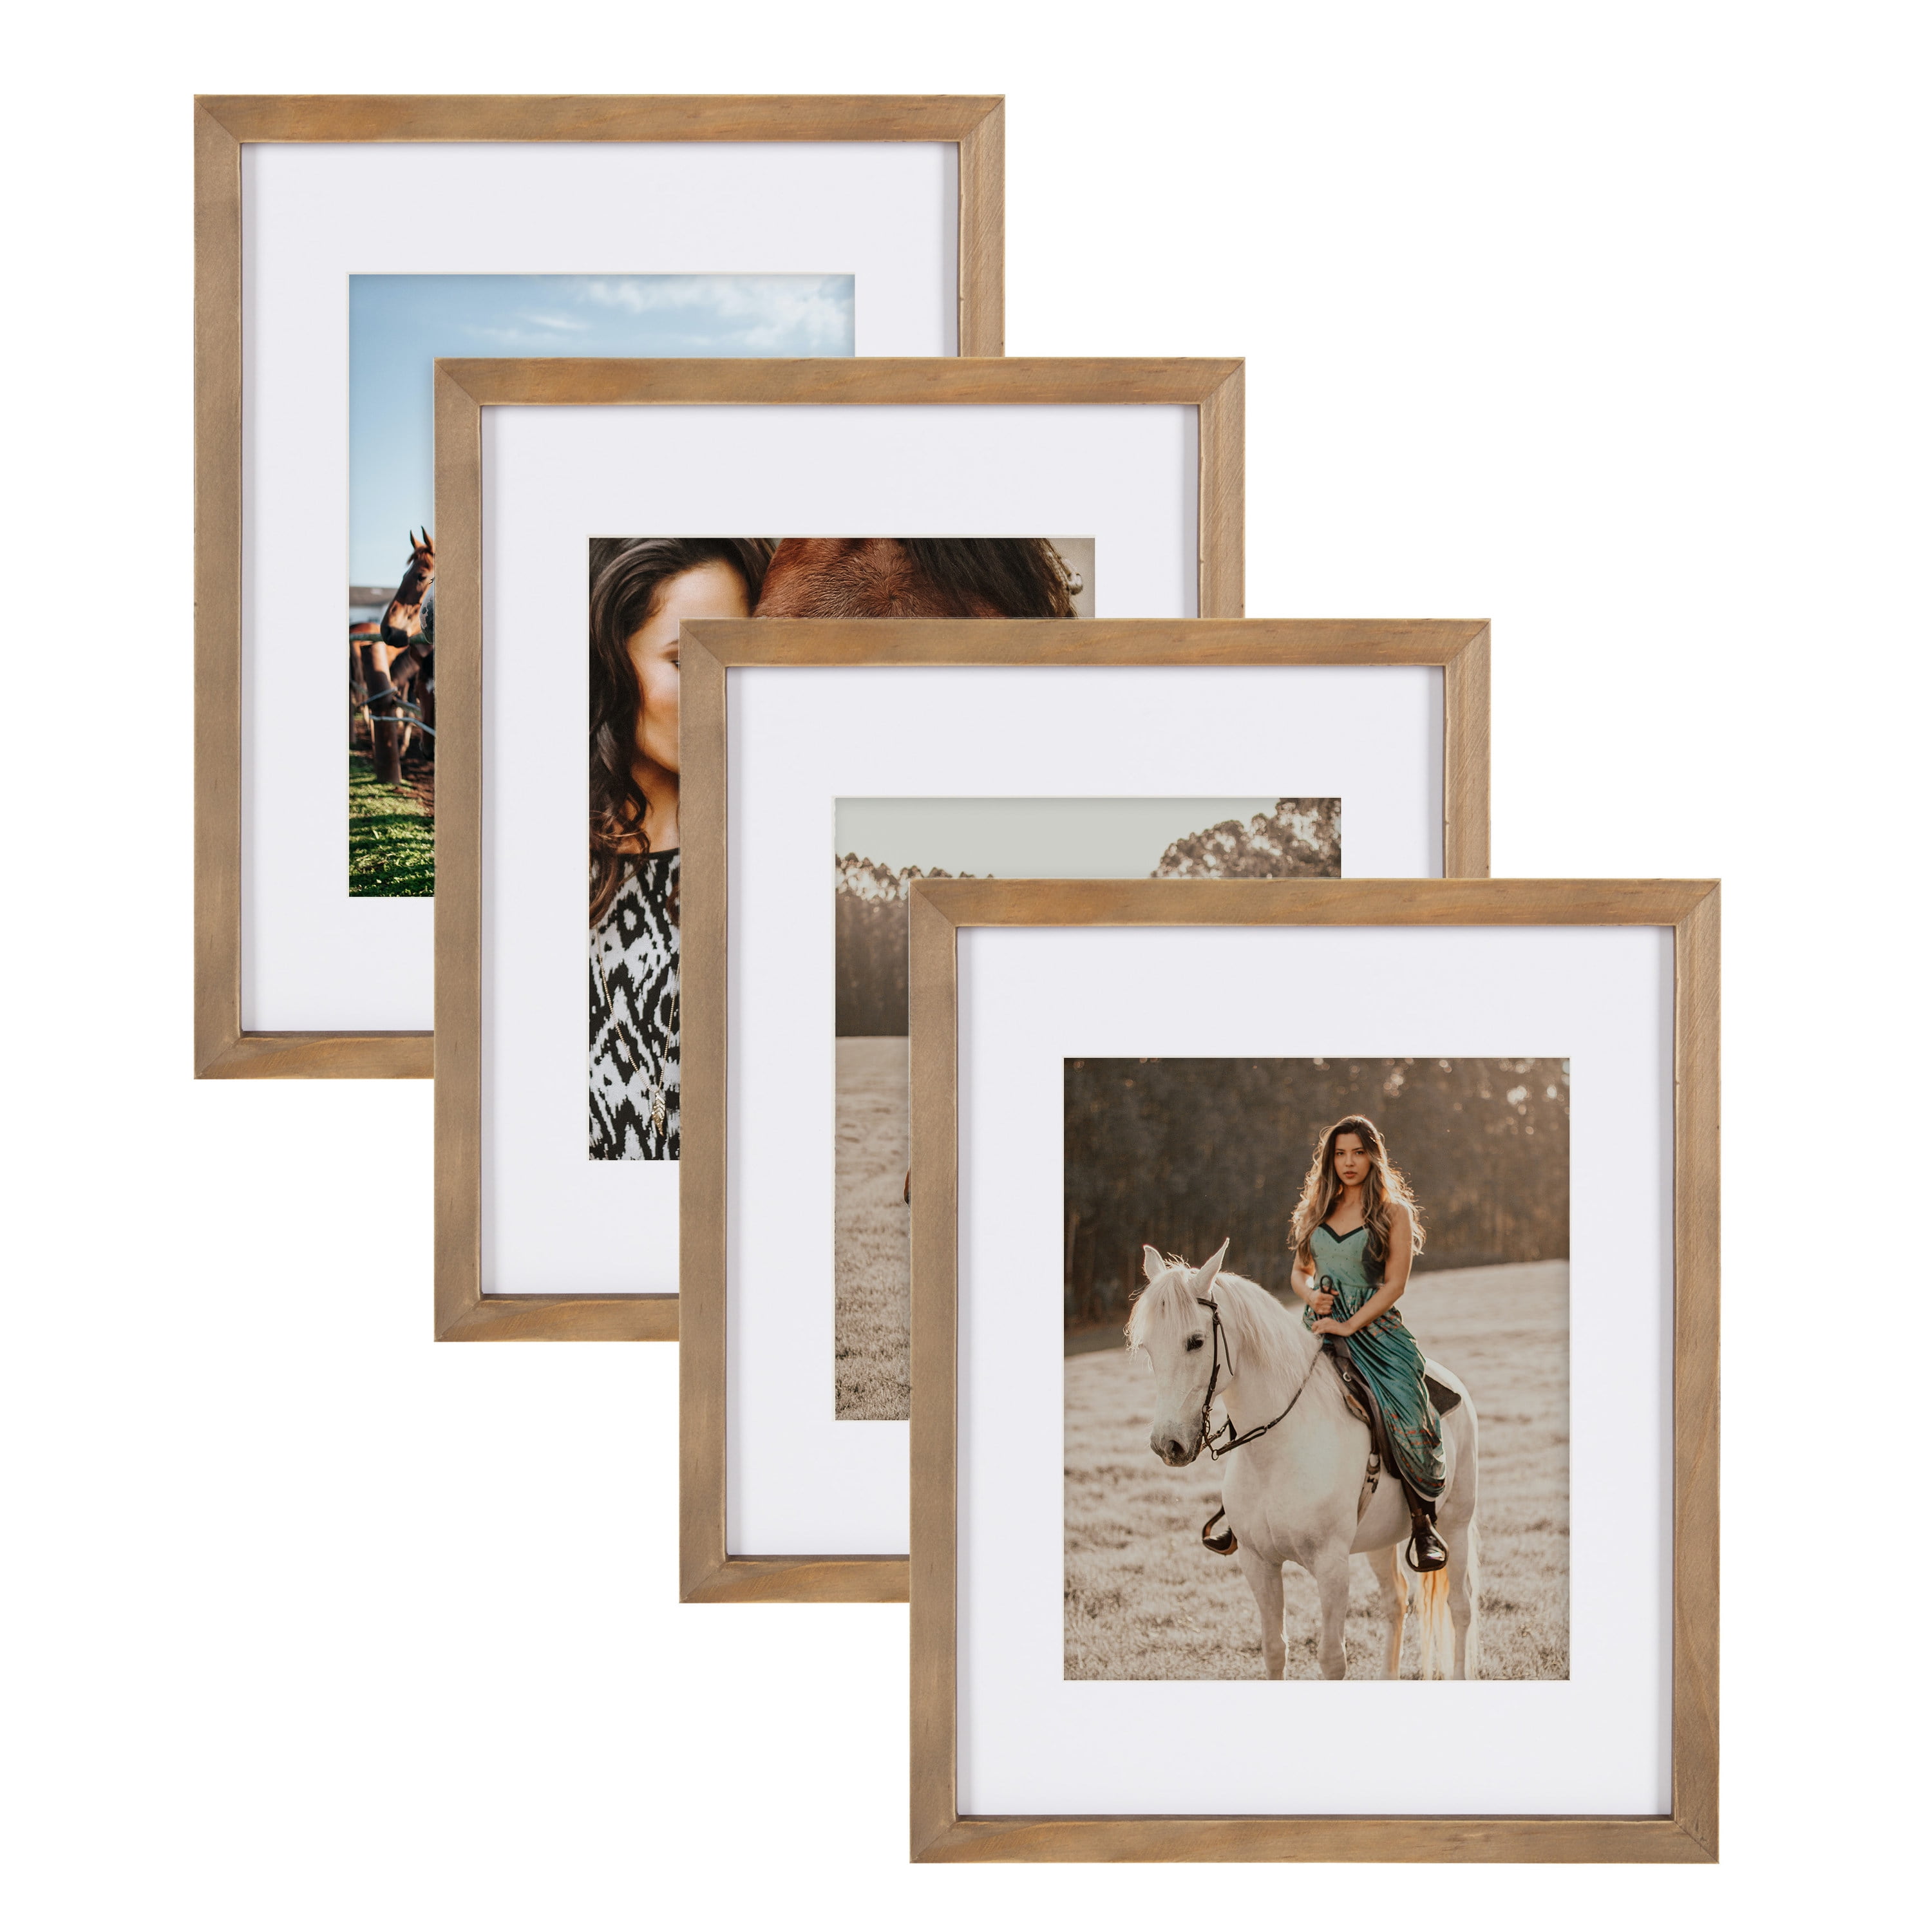 Giftgarden Brown 4x6 Picture Frame Set of 4, 5x7 Frame Matted to 4x6 Photo  Rustic Walnut Frames with Mat for Wall or Tabletop Display